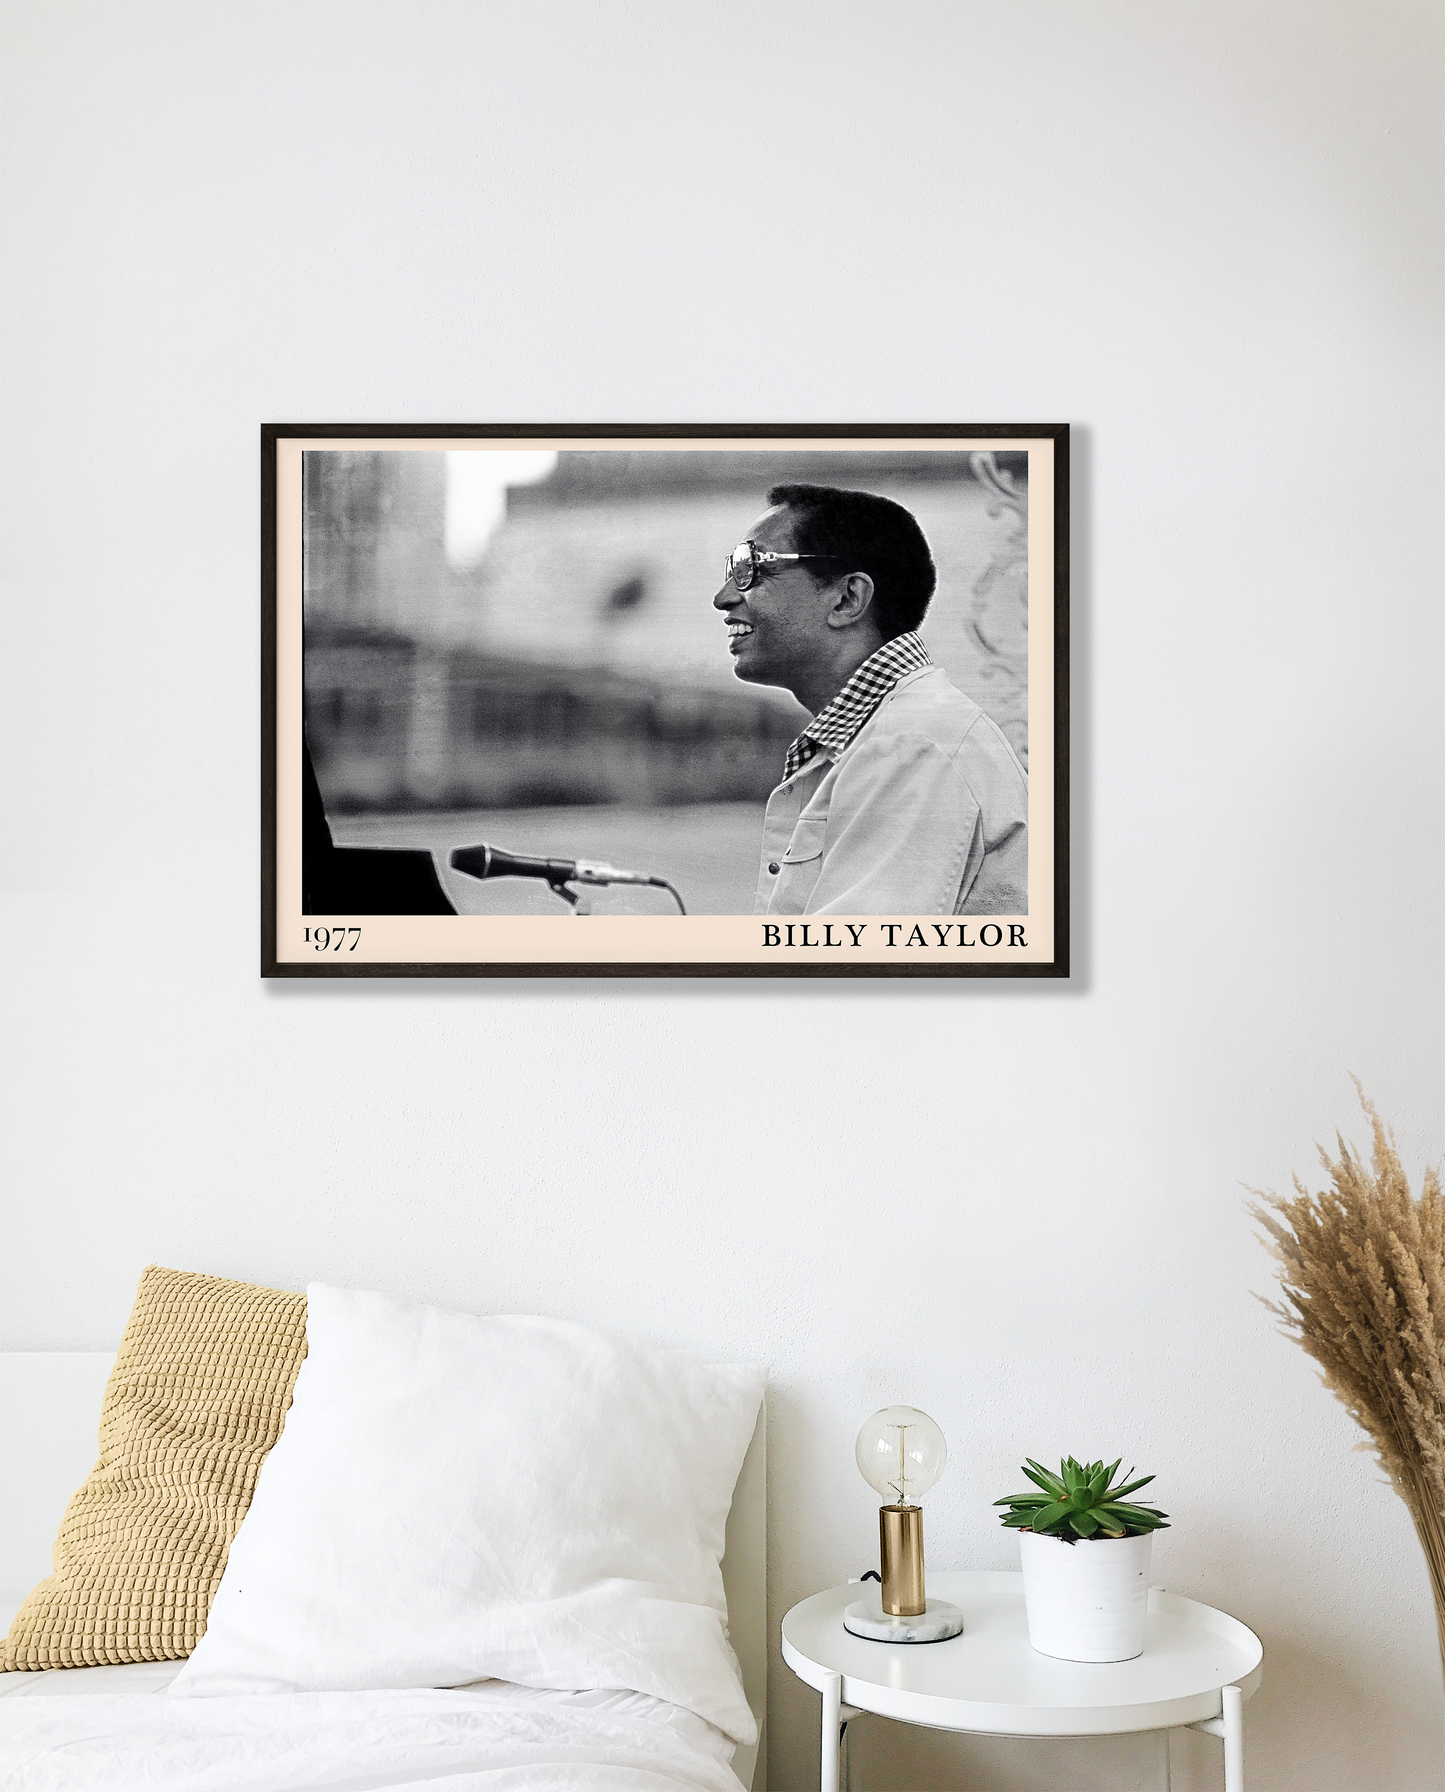 1977 photograph of Billy Taylor taken by Thomas Marcello. Picture crafted into a cool black framed jazz print, with an off-white border. Poster is hanging on a white bedroom wall